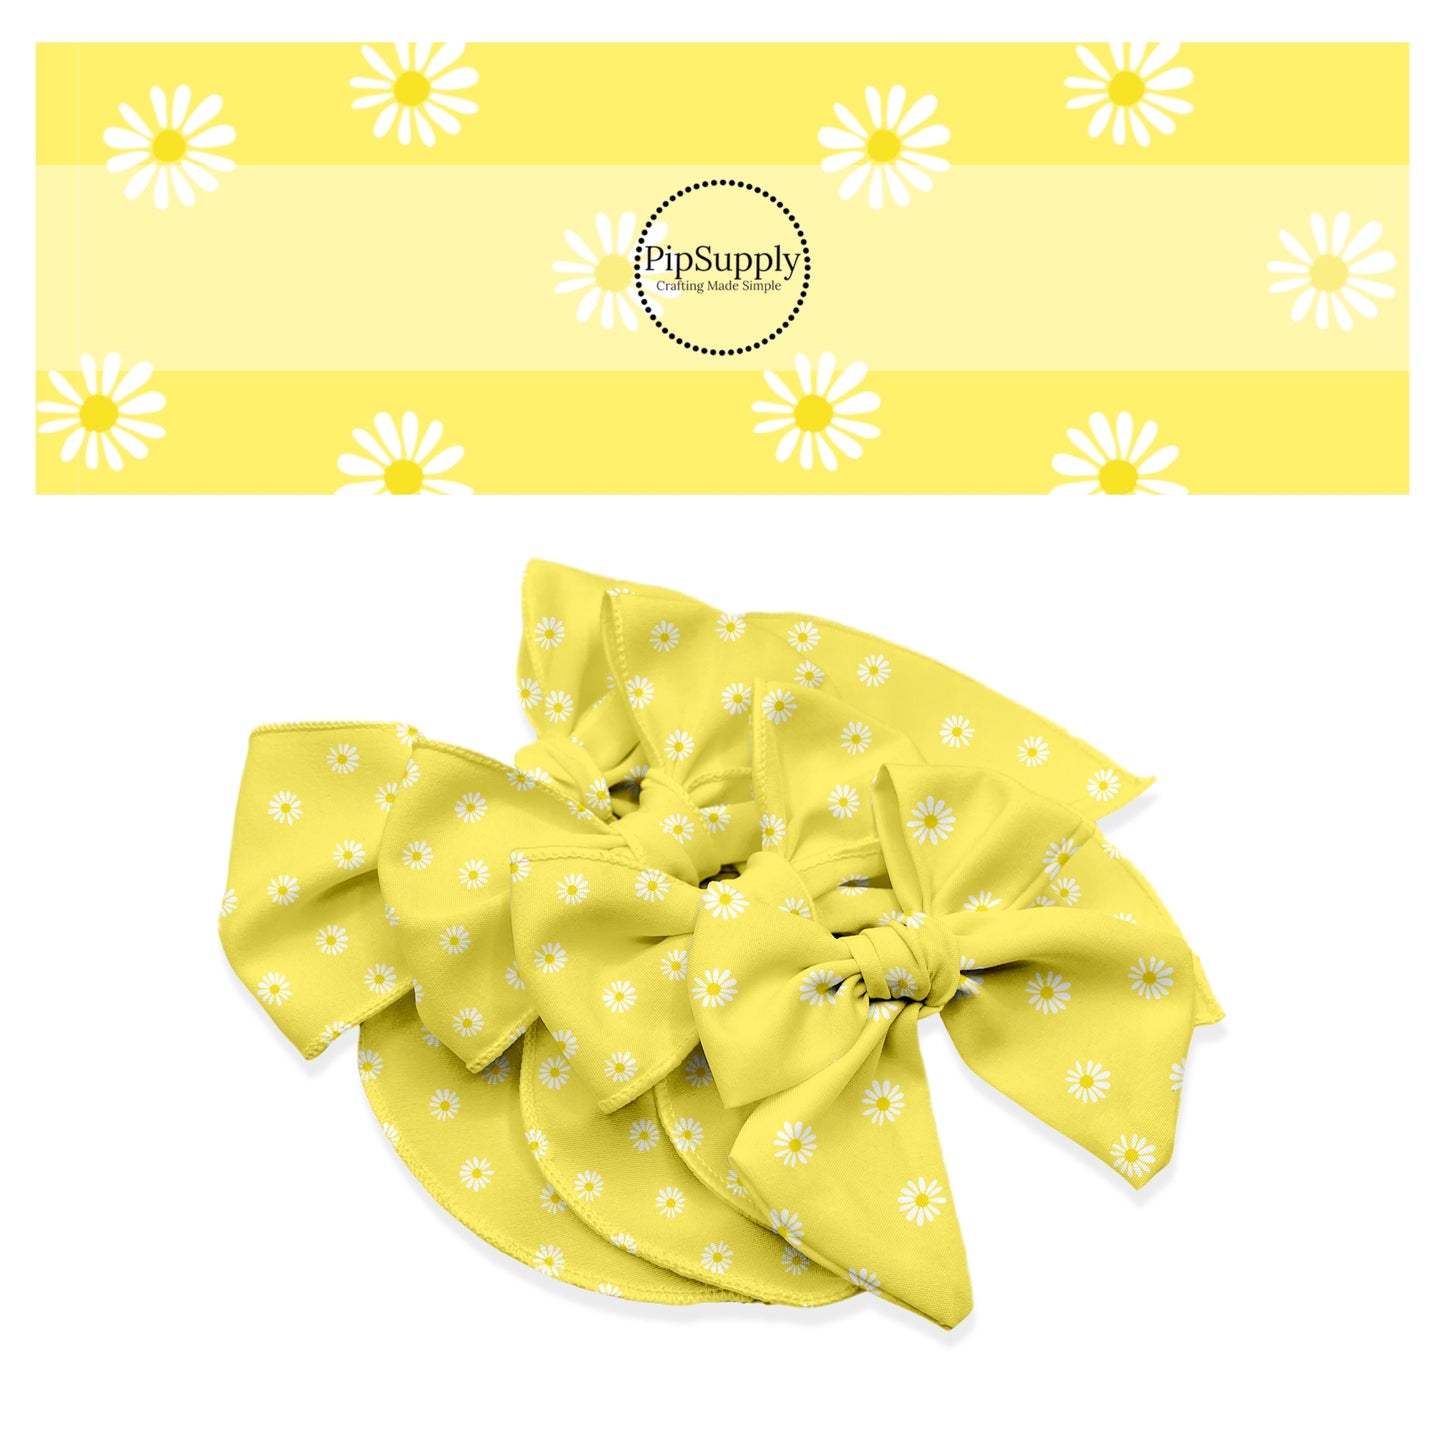 Sunny Yellow No Sew Bow Strips - Bow Making Material - Yellow Bows with White Daises Throughout. Spring Bows - Easter Bows